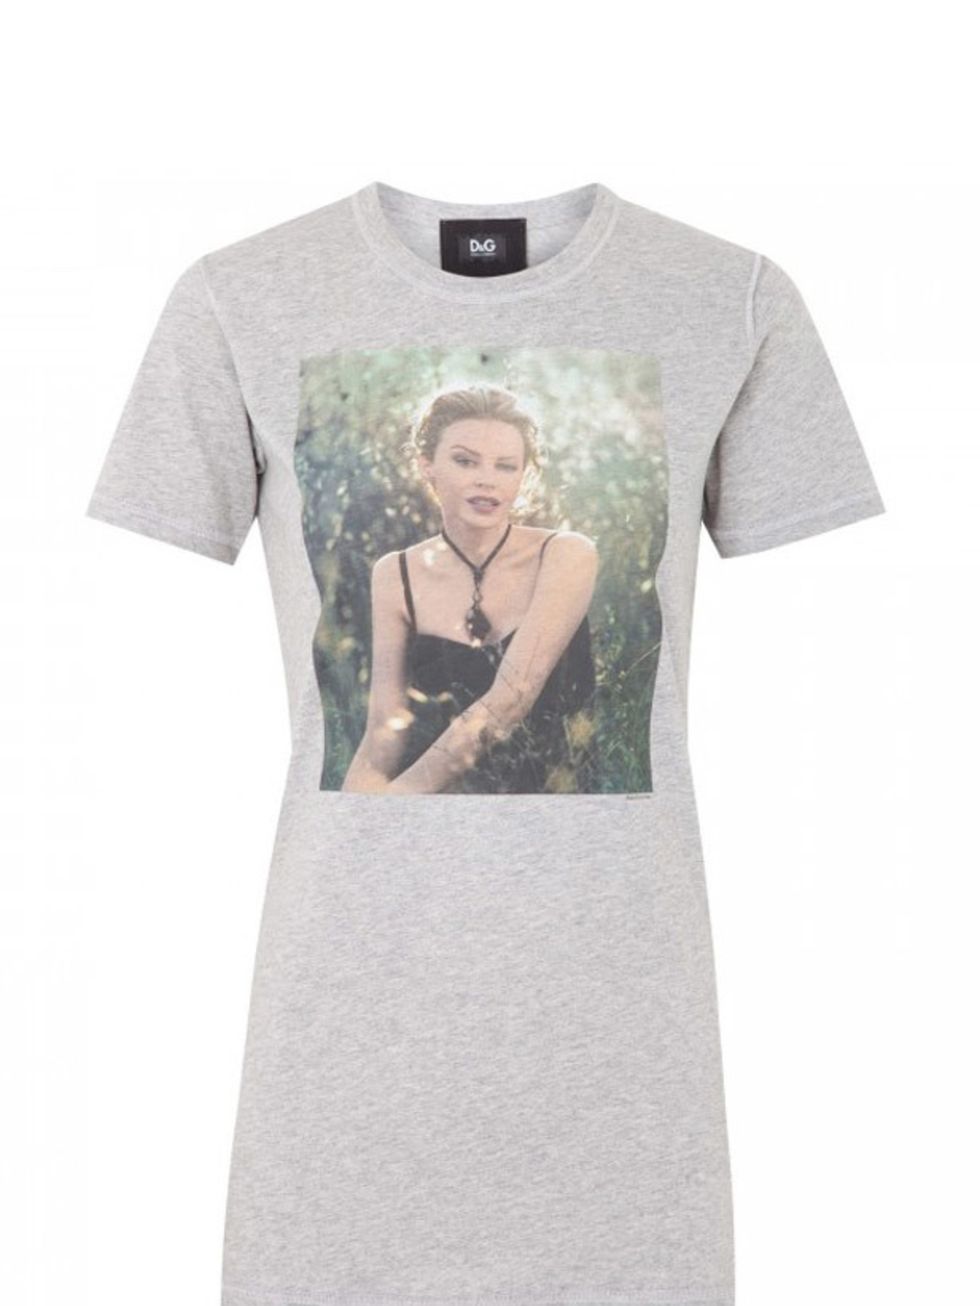 <p>Two icons combine with this Kylie-printed D&amp;G T-shirt. We want D&amp;G Kylie print T-shirt, £110, at <a href="http://www.harveynichols.com/womens/categories-1/designer-tops/t-shirts/s375207-kylie-t-shirt.html?colour=GREY">Harvey Nichols</a></p>